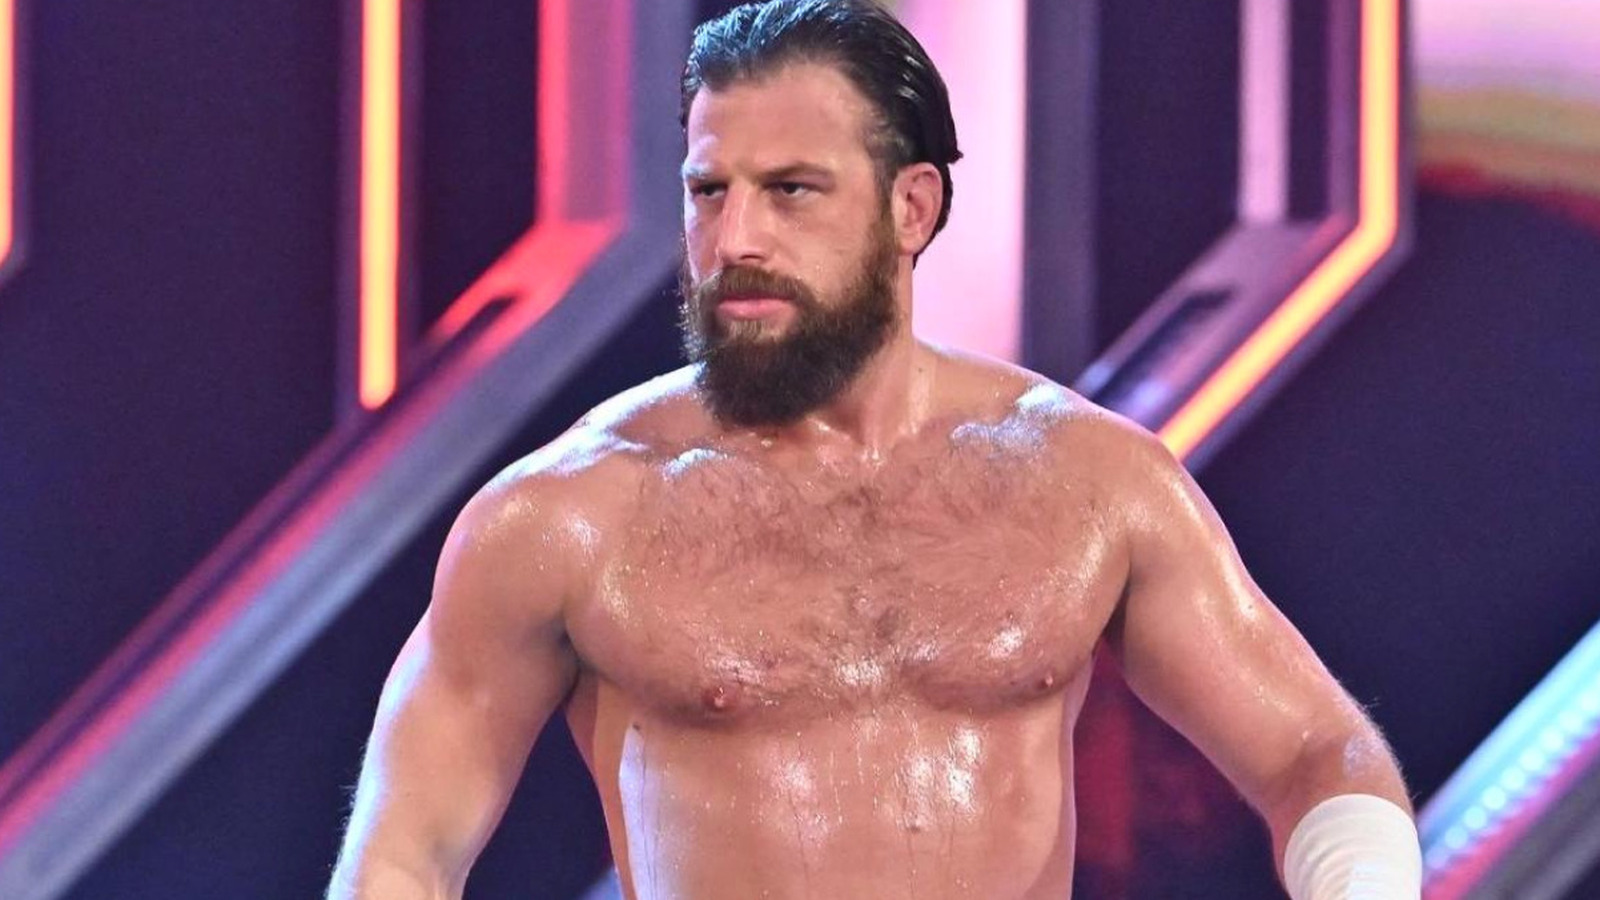 Triple H Responds To Reports Of Drew Gulak's WWE Release, If Ronda Rousey Factored In